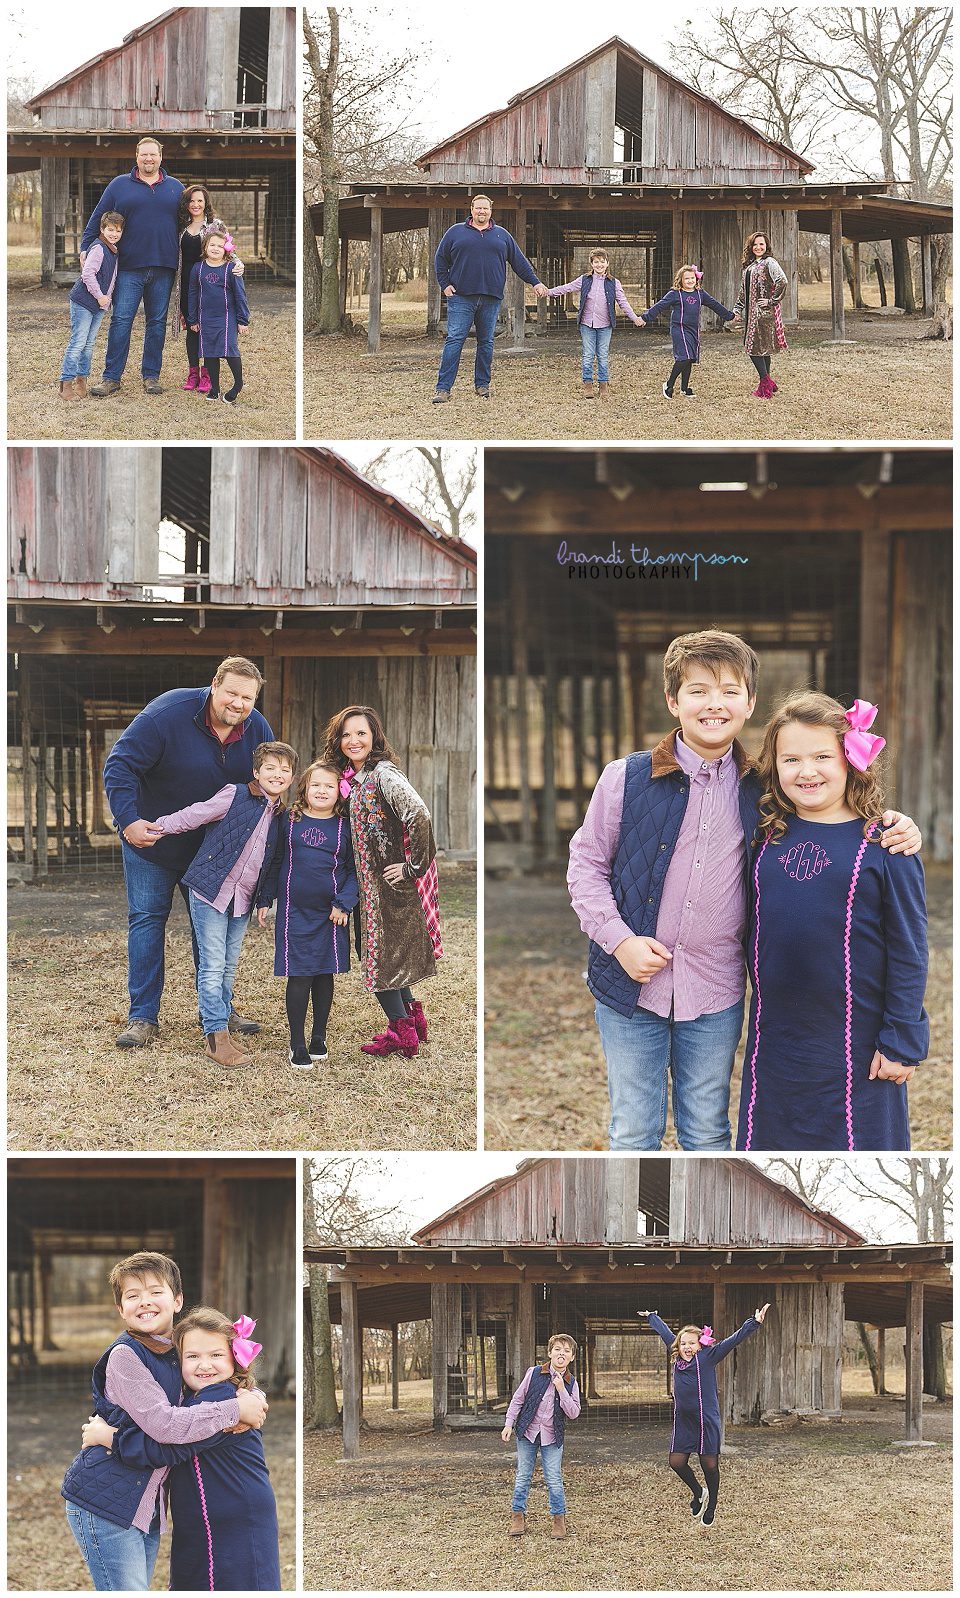 outdoor country family session with dad, mom, son and younger daughter